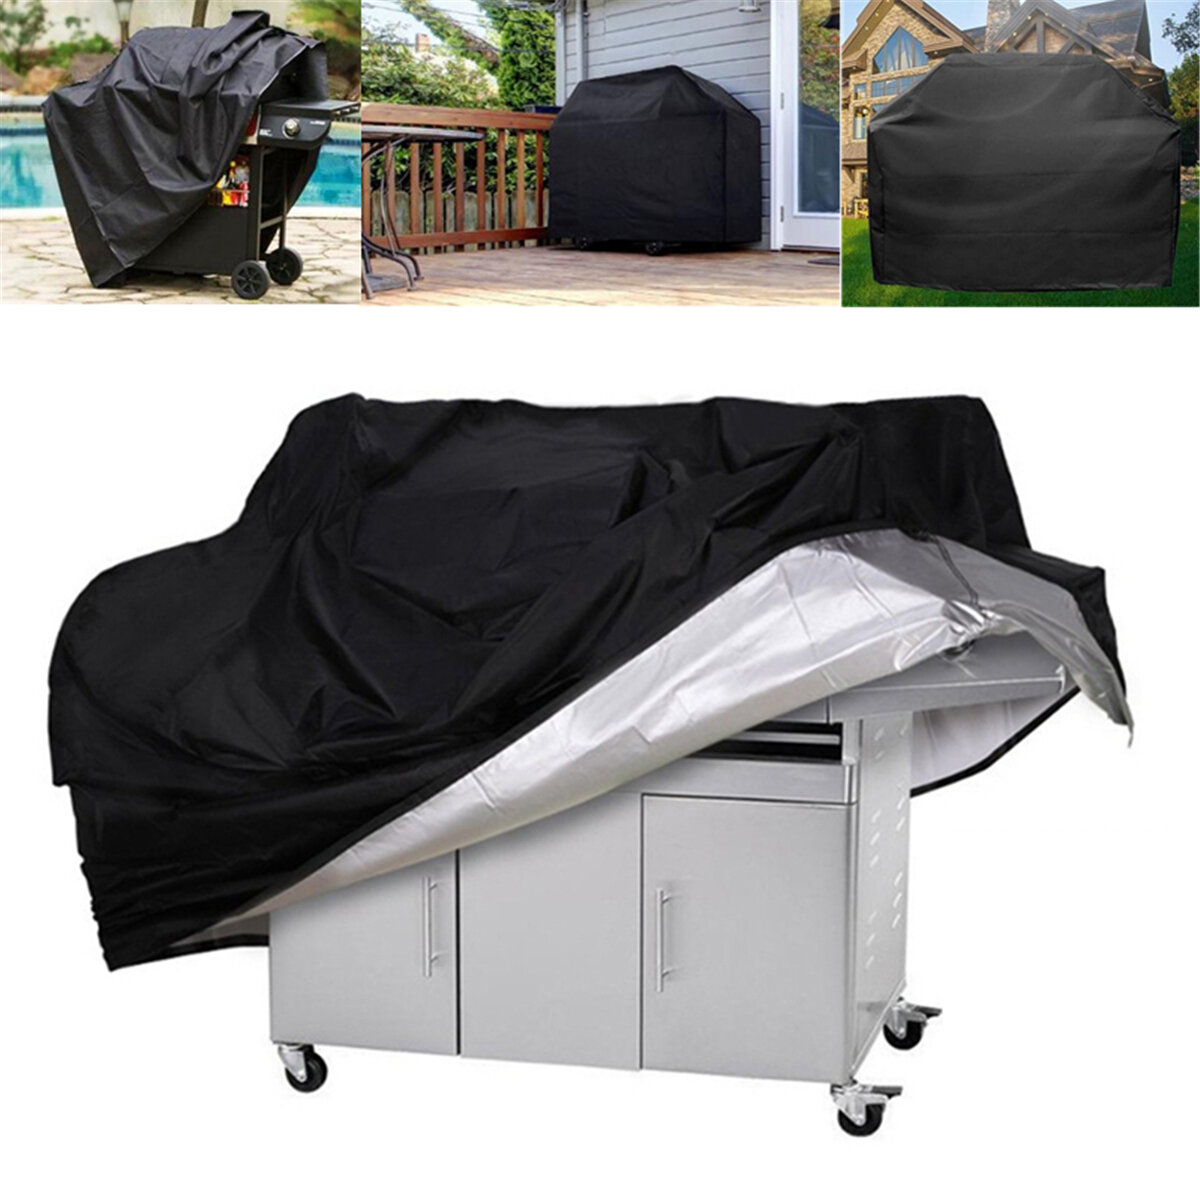 

Waterproof BBQ Grill Barbeque Cover Outdoor Grill Rain UV Proof Canopy Anti Dust Protector For Gas Charcoal Electric Bar